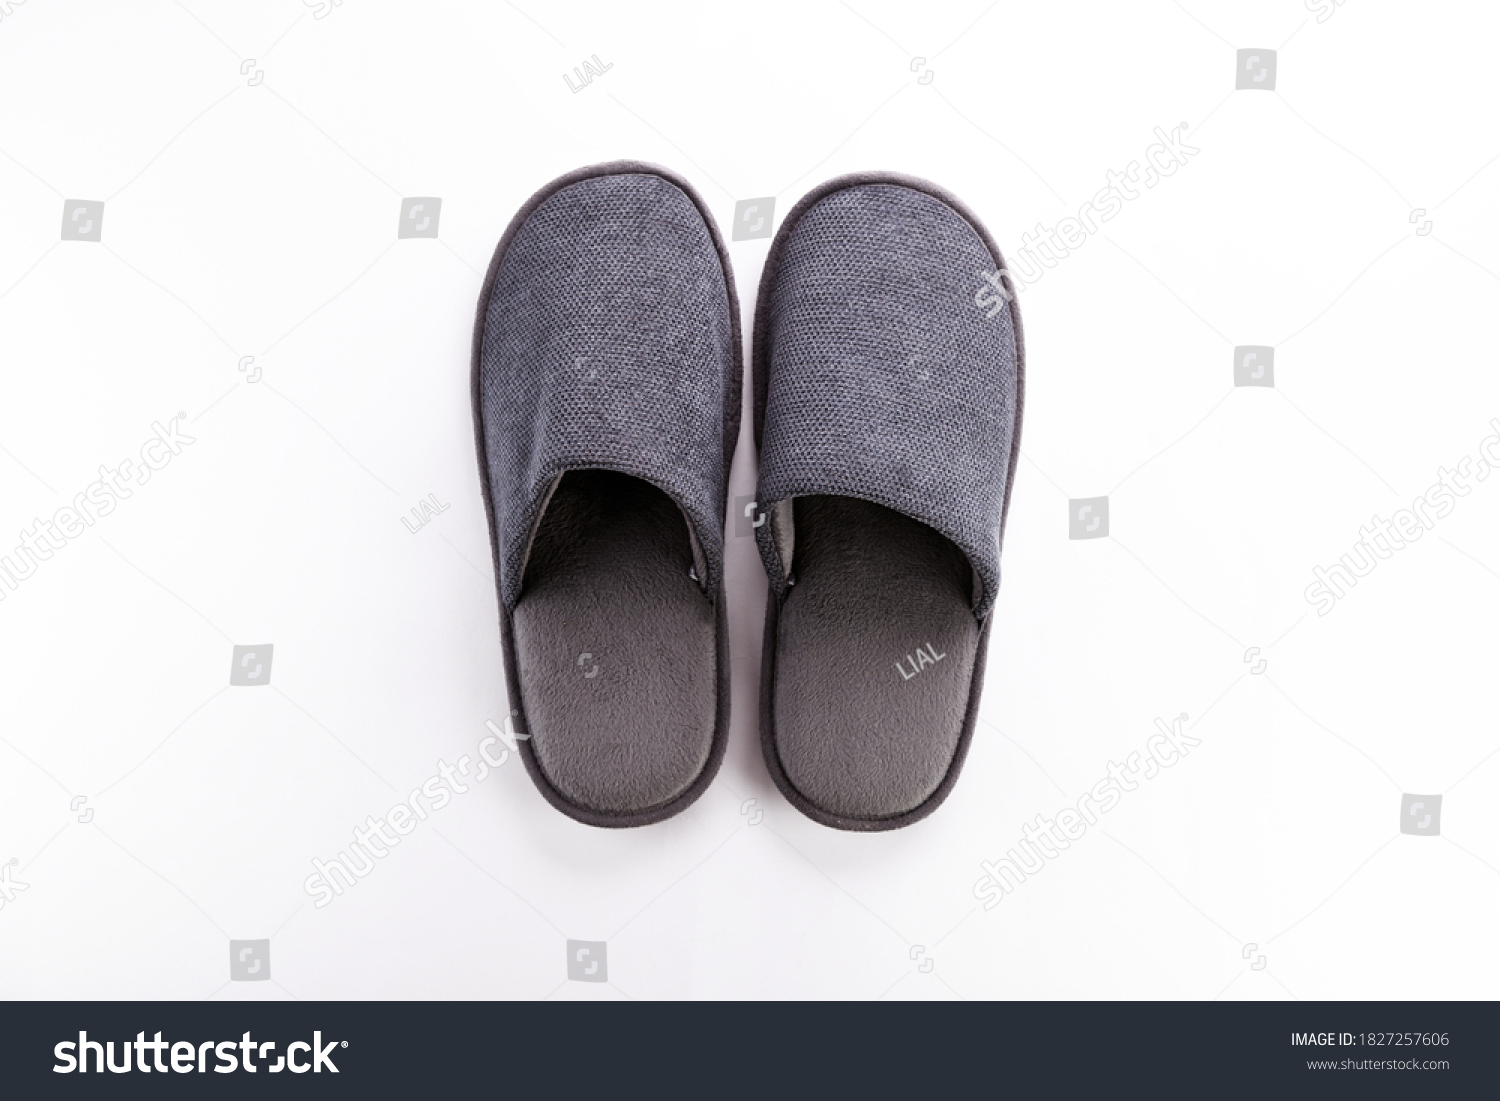 Pair of blank soft gray home slippers, design mockup. Hotel bath slippers top view isolated on white background. Clear warm domestic sandal or sneakers. Bed shoes accessory footwear. #1827257606